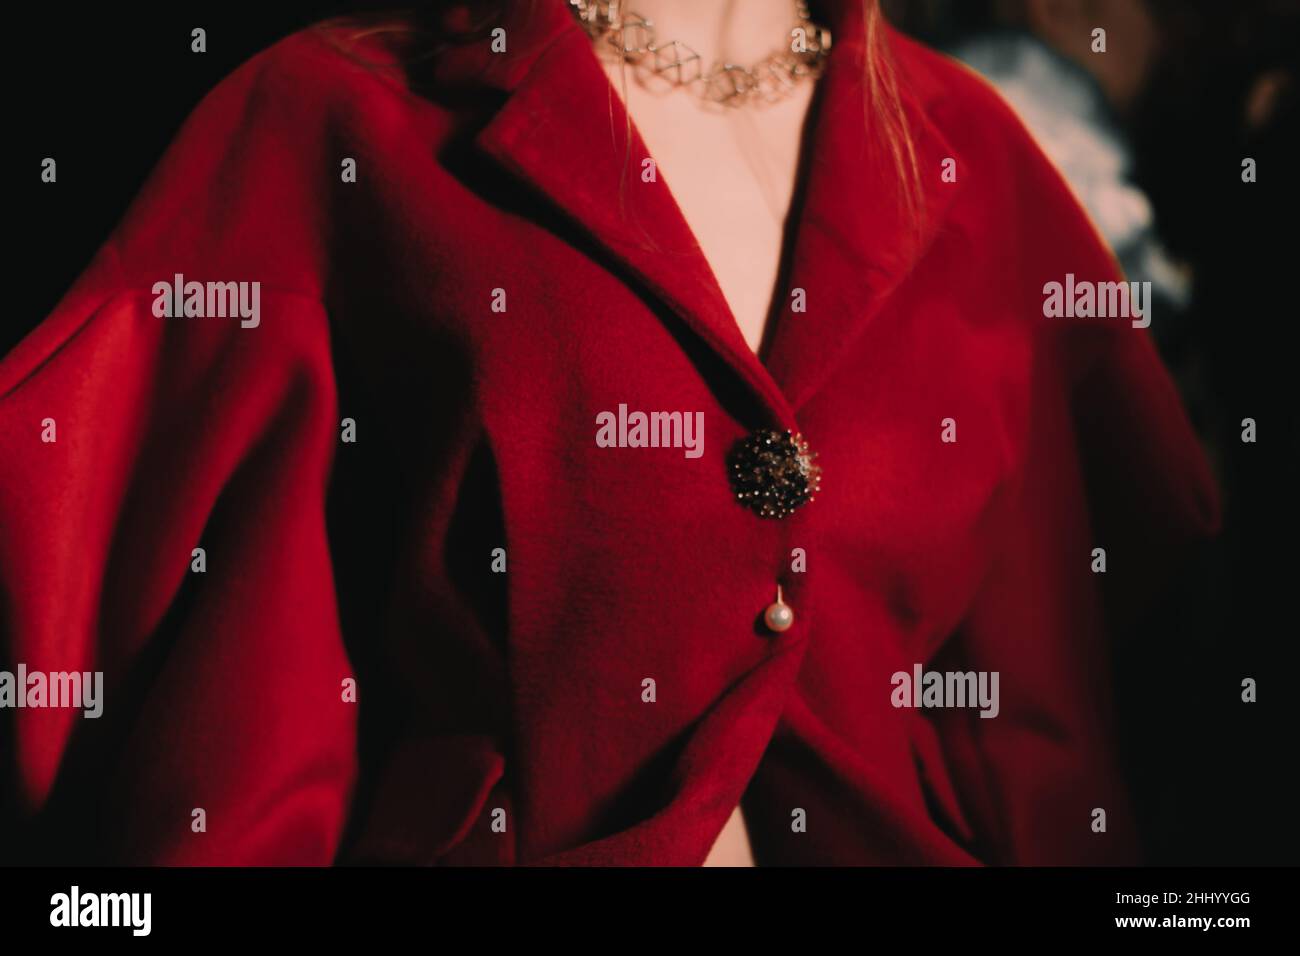 Part of a female body dressed in an elegant red jacket with golden buttons. Women's fashion and accessories Stock Photo